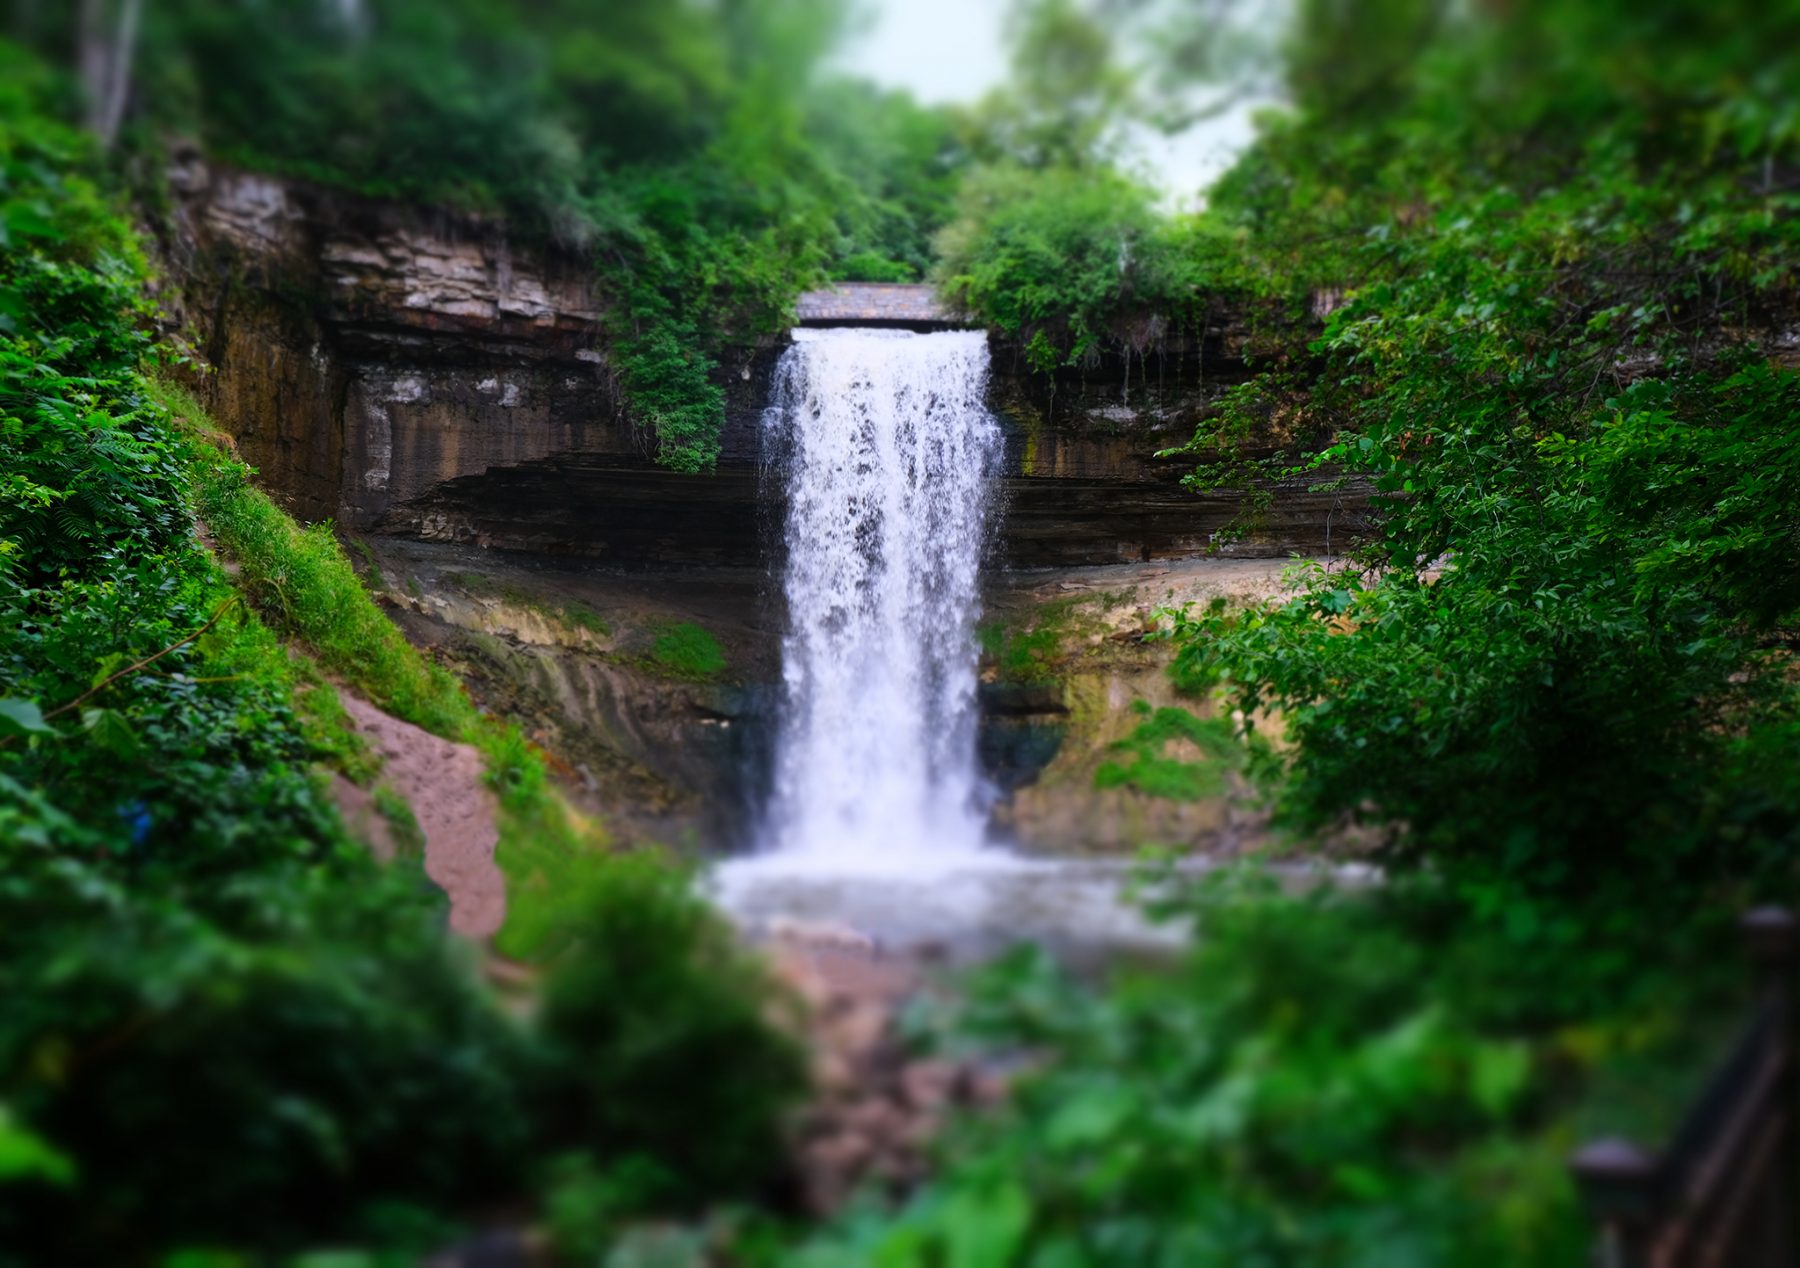 The Minnehaha Falls are flowing after today's rain shower.